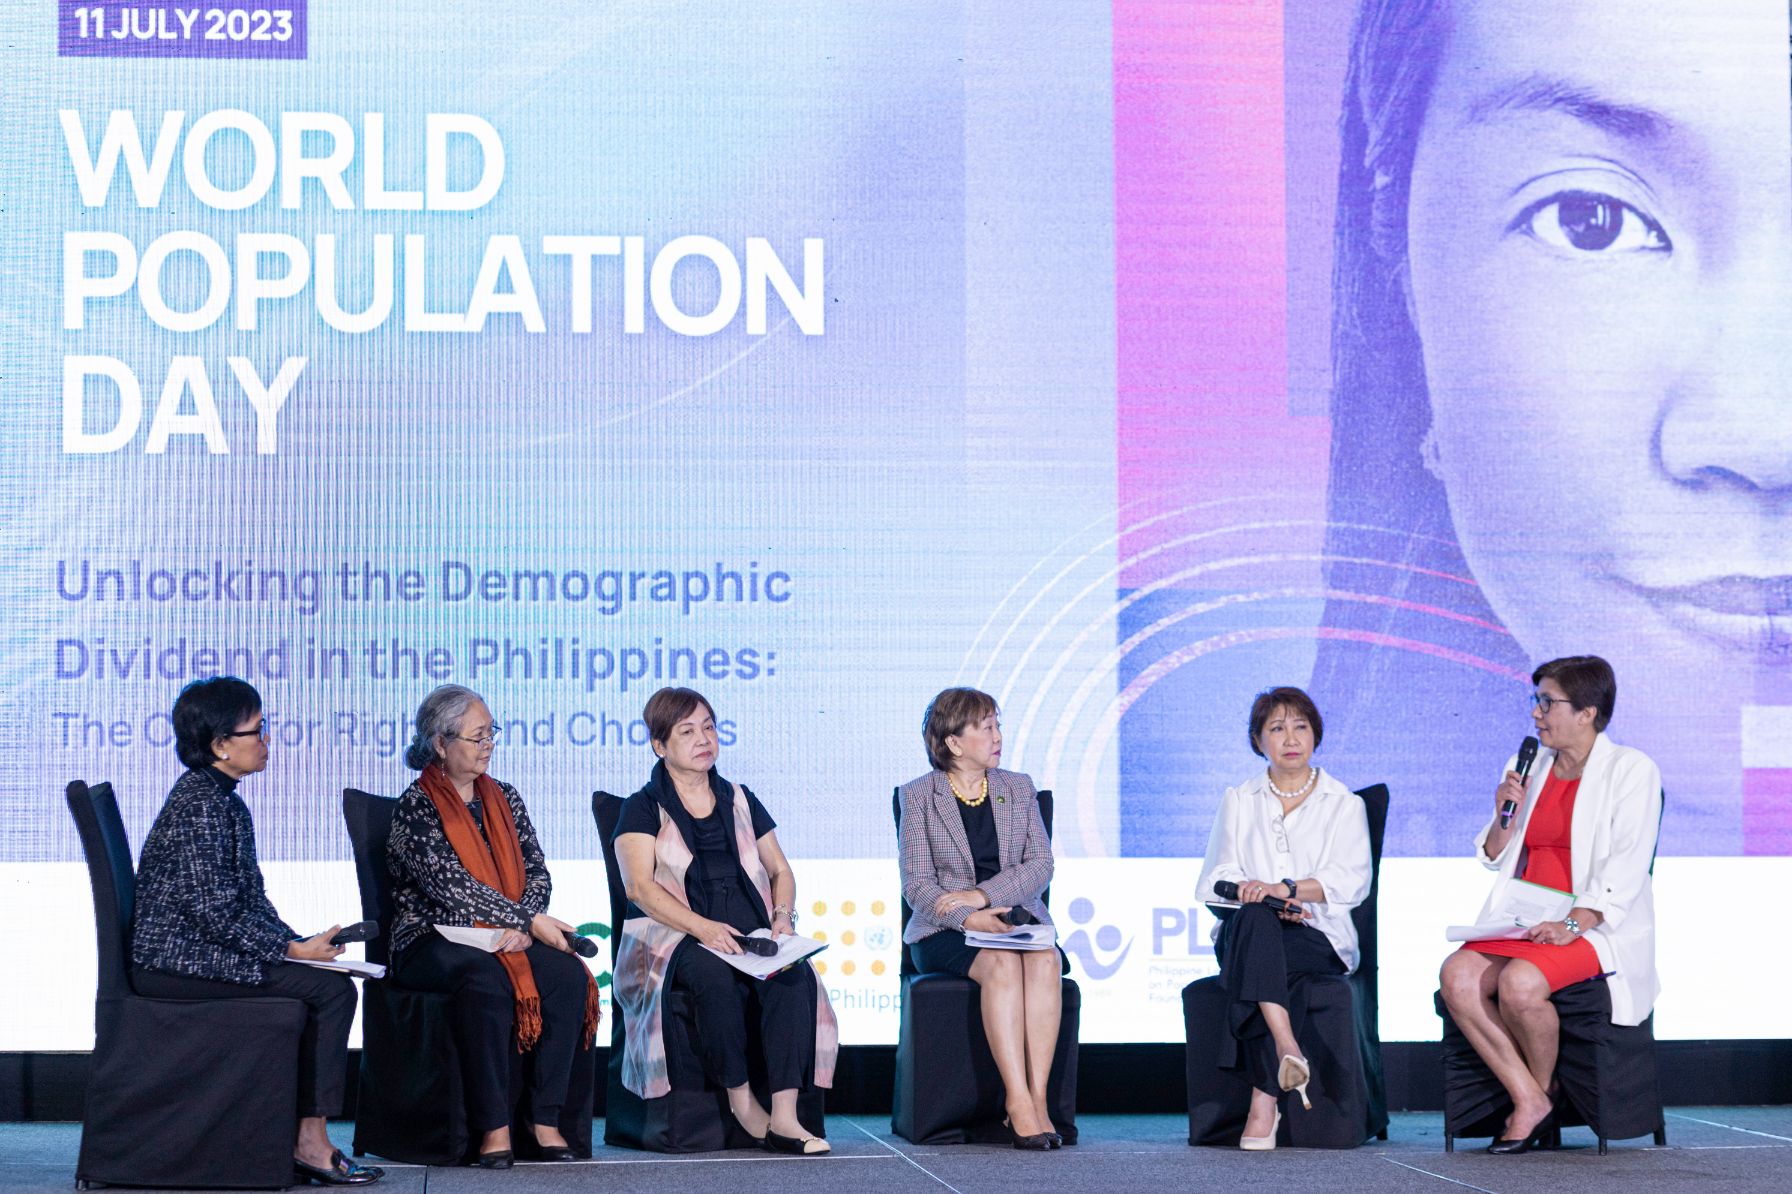 Panel discussion for World Population Day event